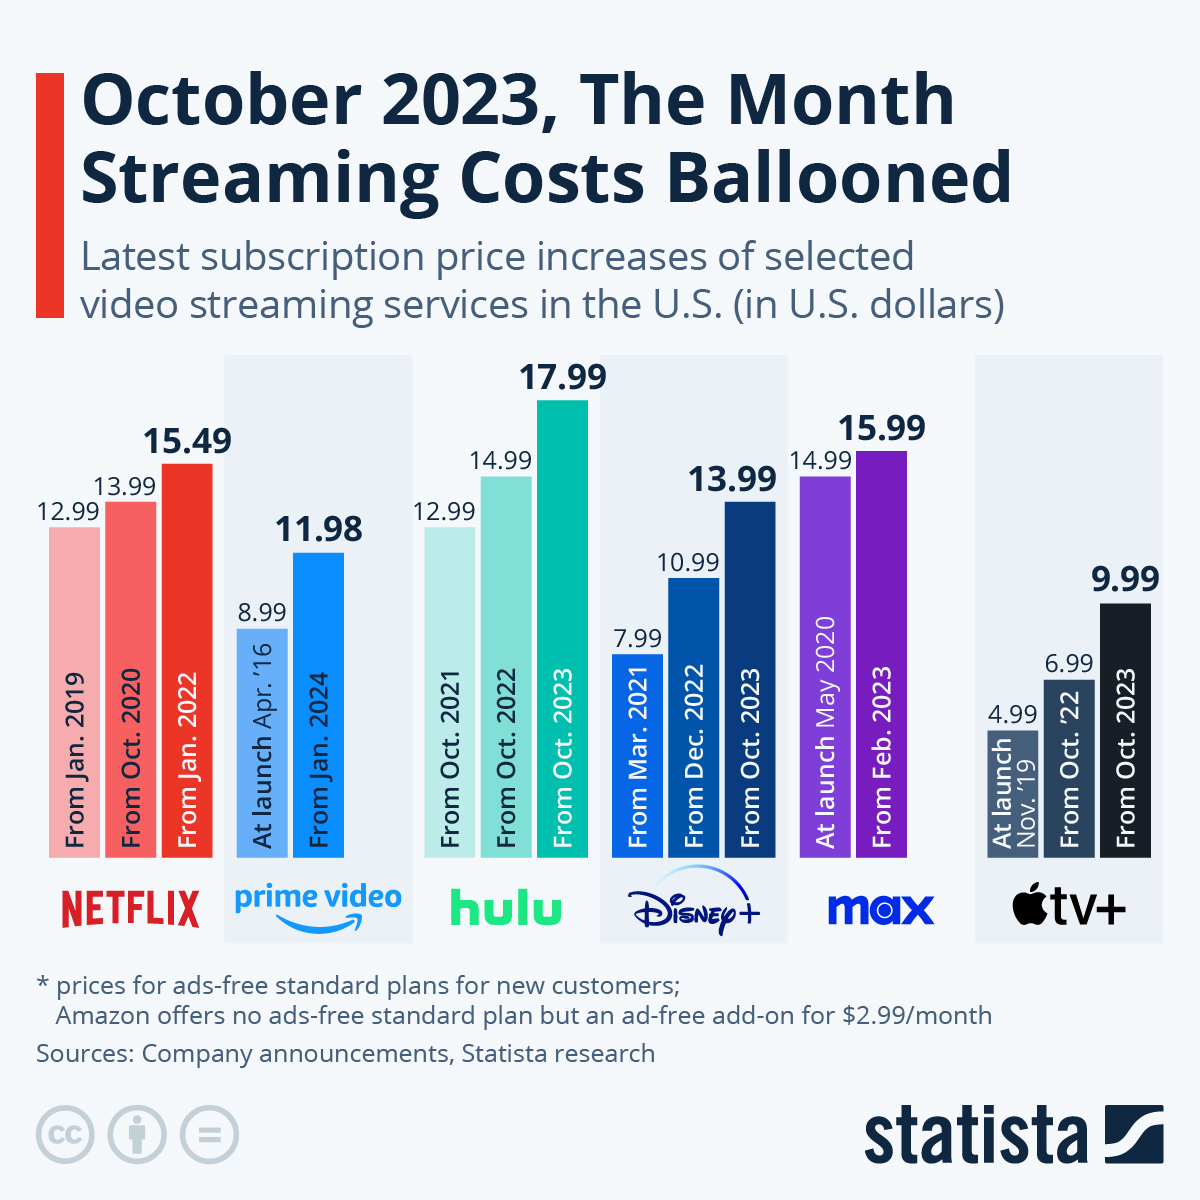 Streaming services keep getting more expensive